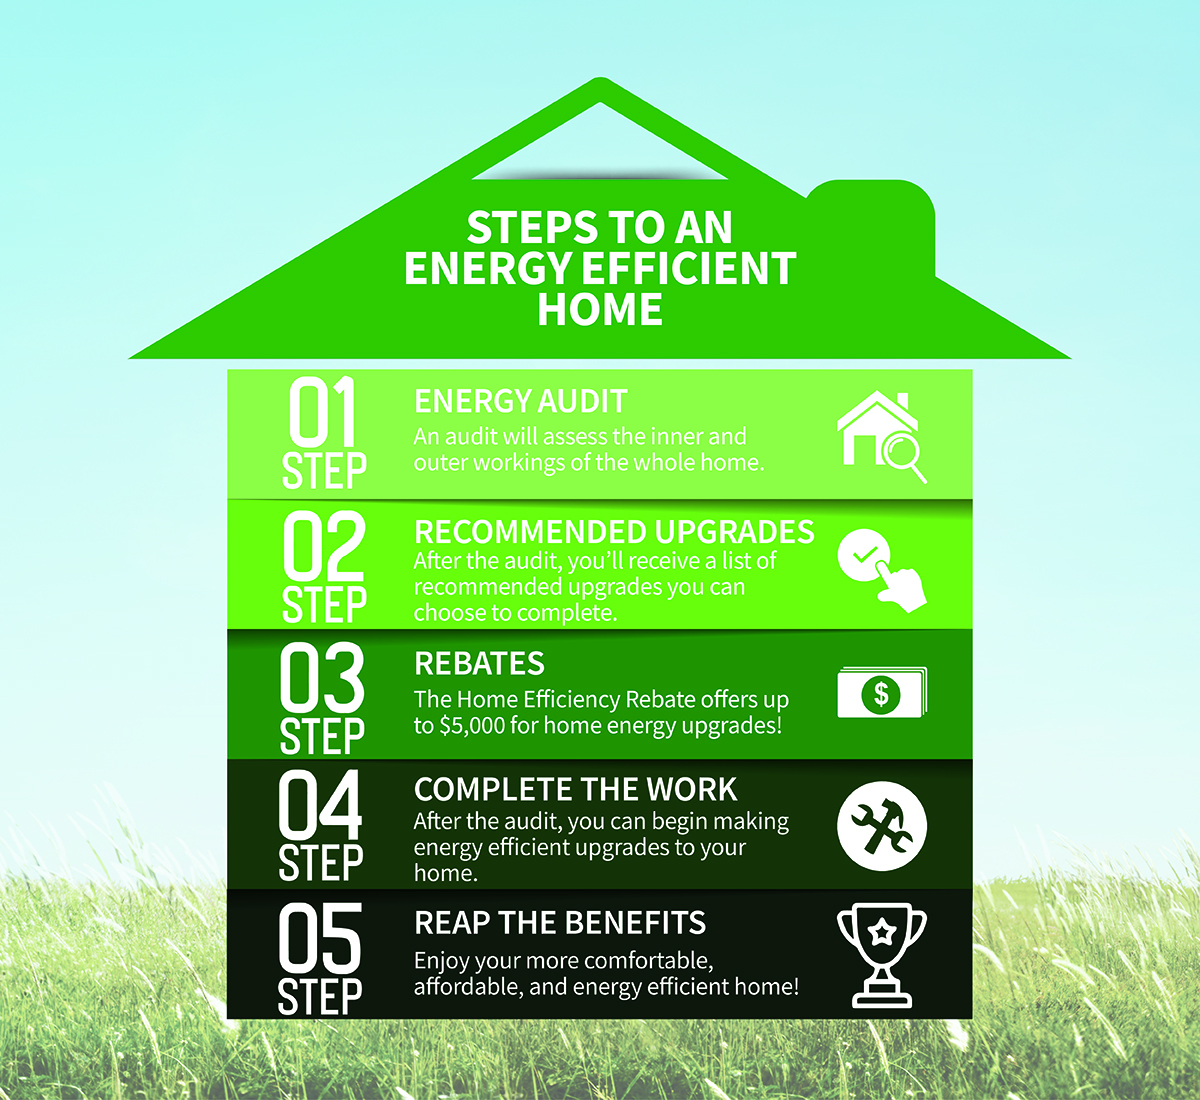 old homes can be energy efficient with the home efficiency rebate